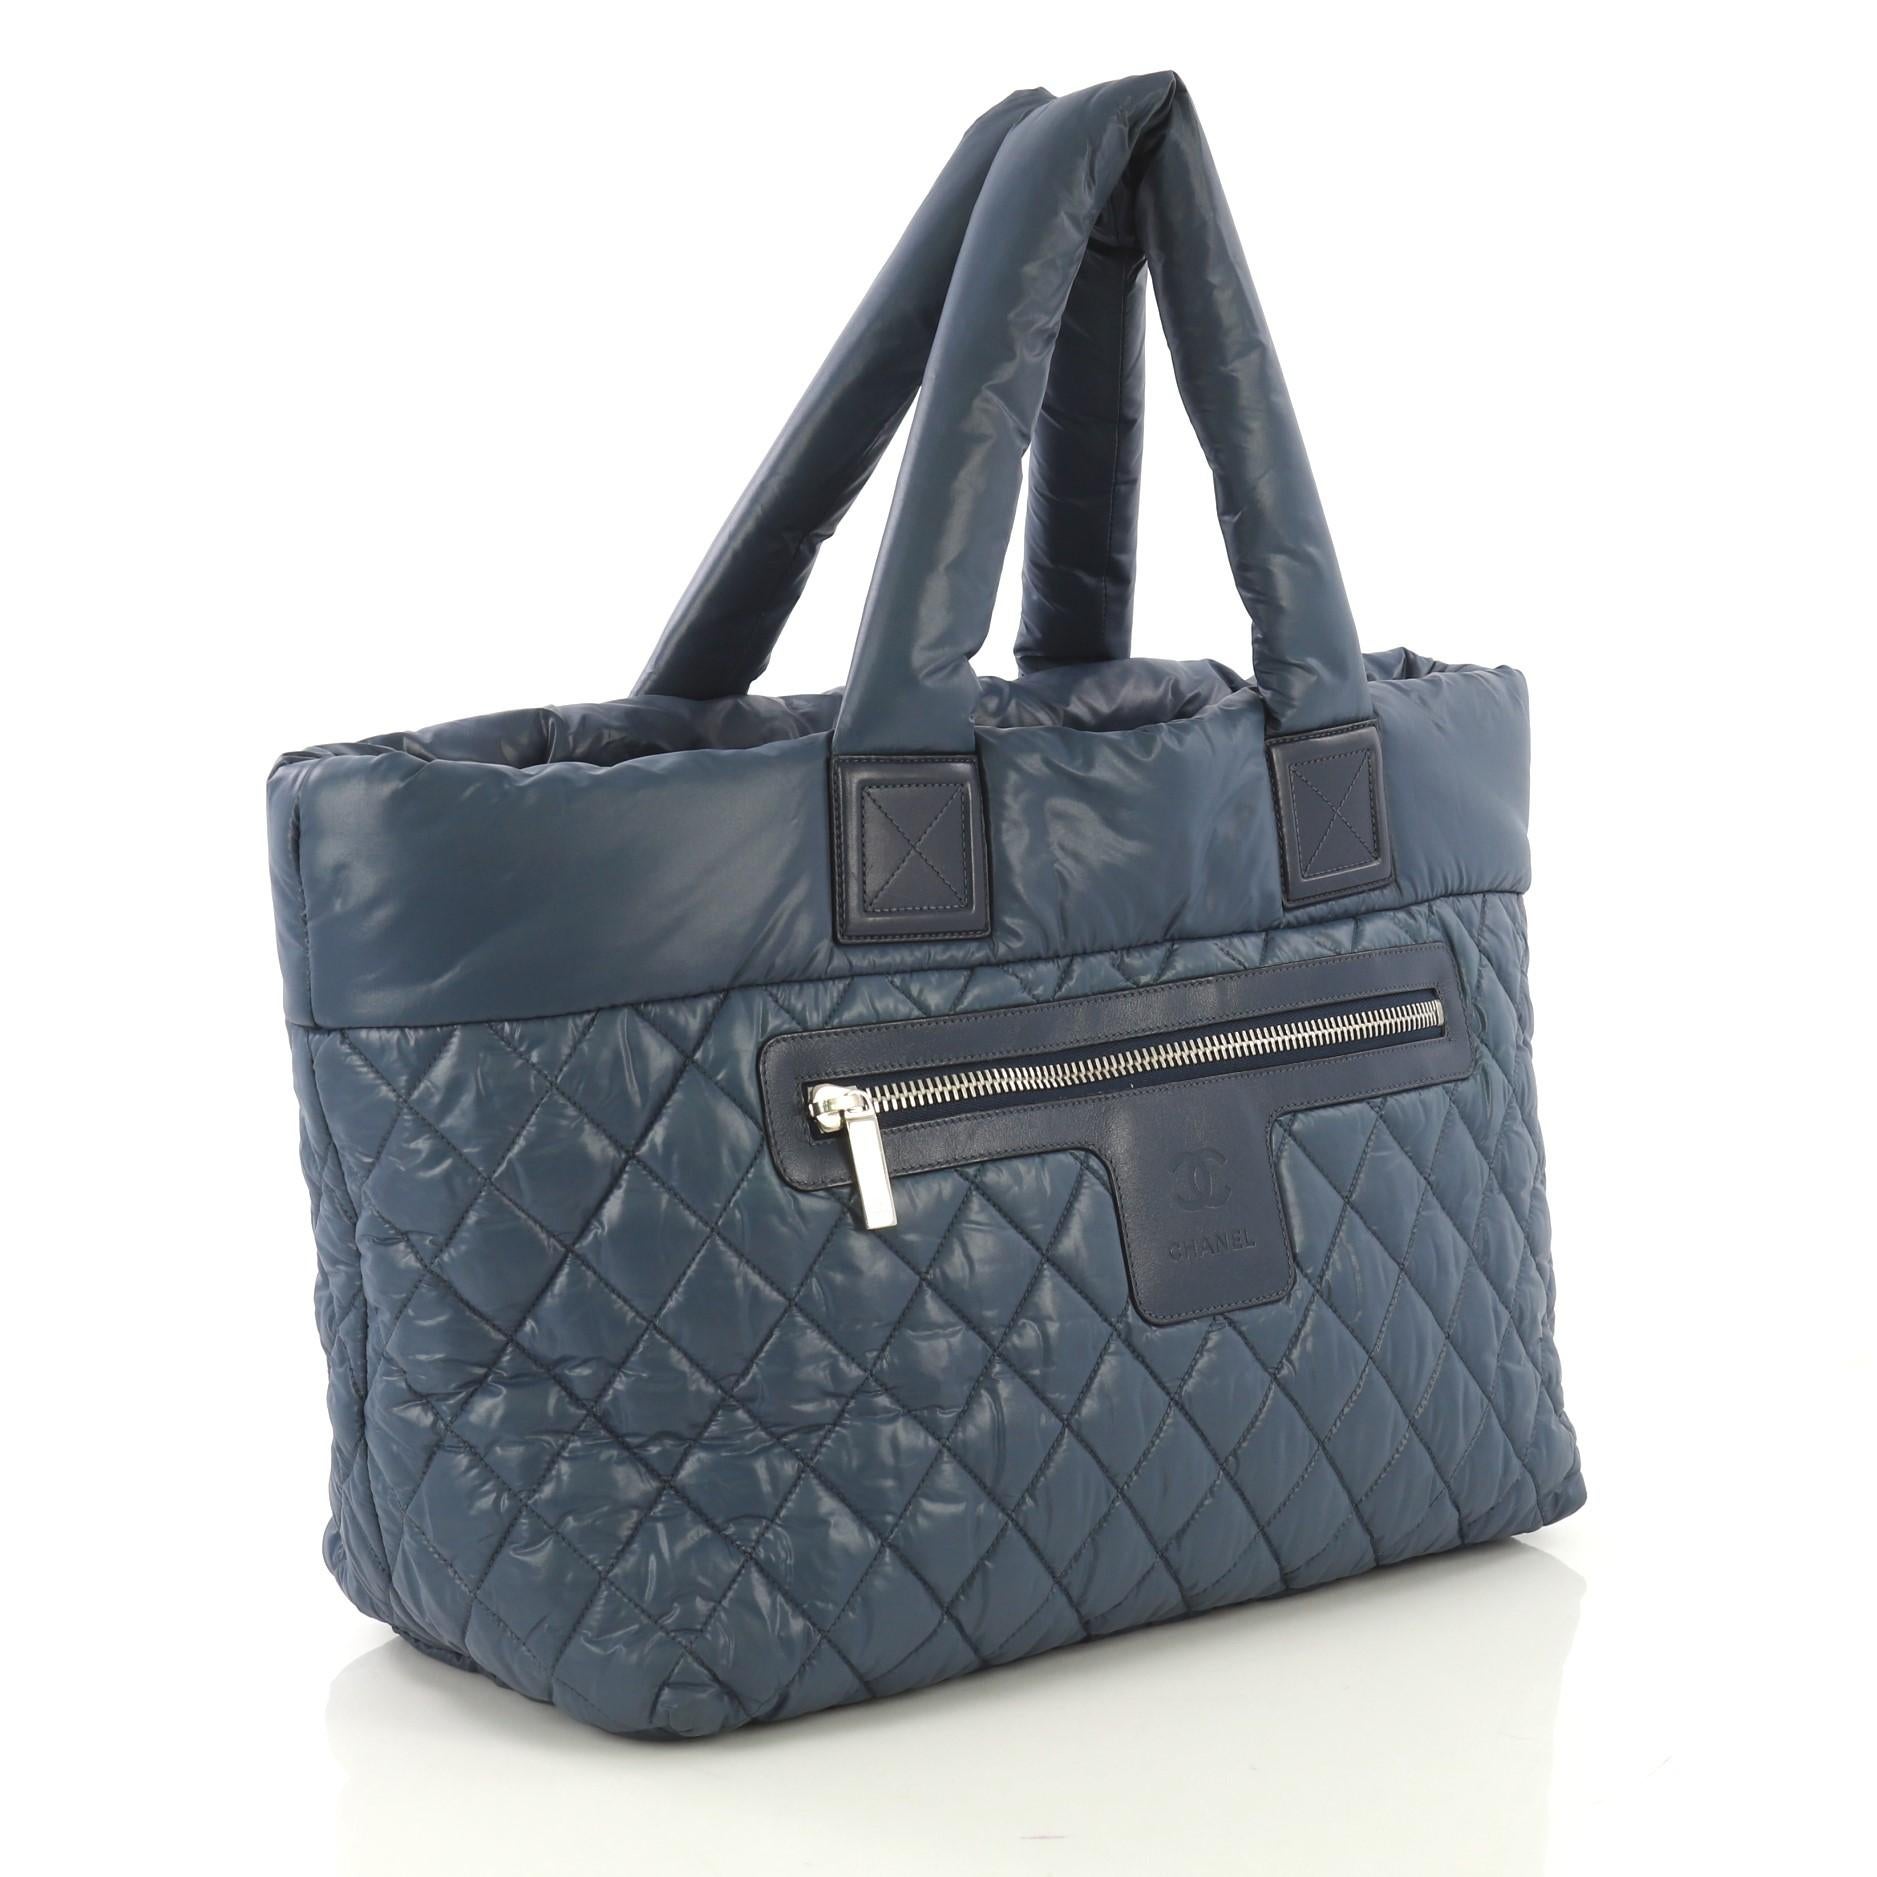 This Chanel Coco Cocoon Zipped Tote Quilted Nylon Large, crafted from blue quilted nylon, features padded top handles, exterior zip pocket, and silver-tone hardware. Its zip closure opens to a black nylon interior with zip pocket. Hologram sticker